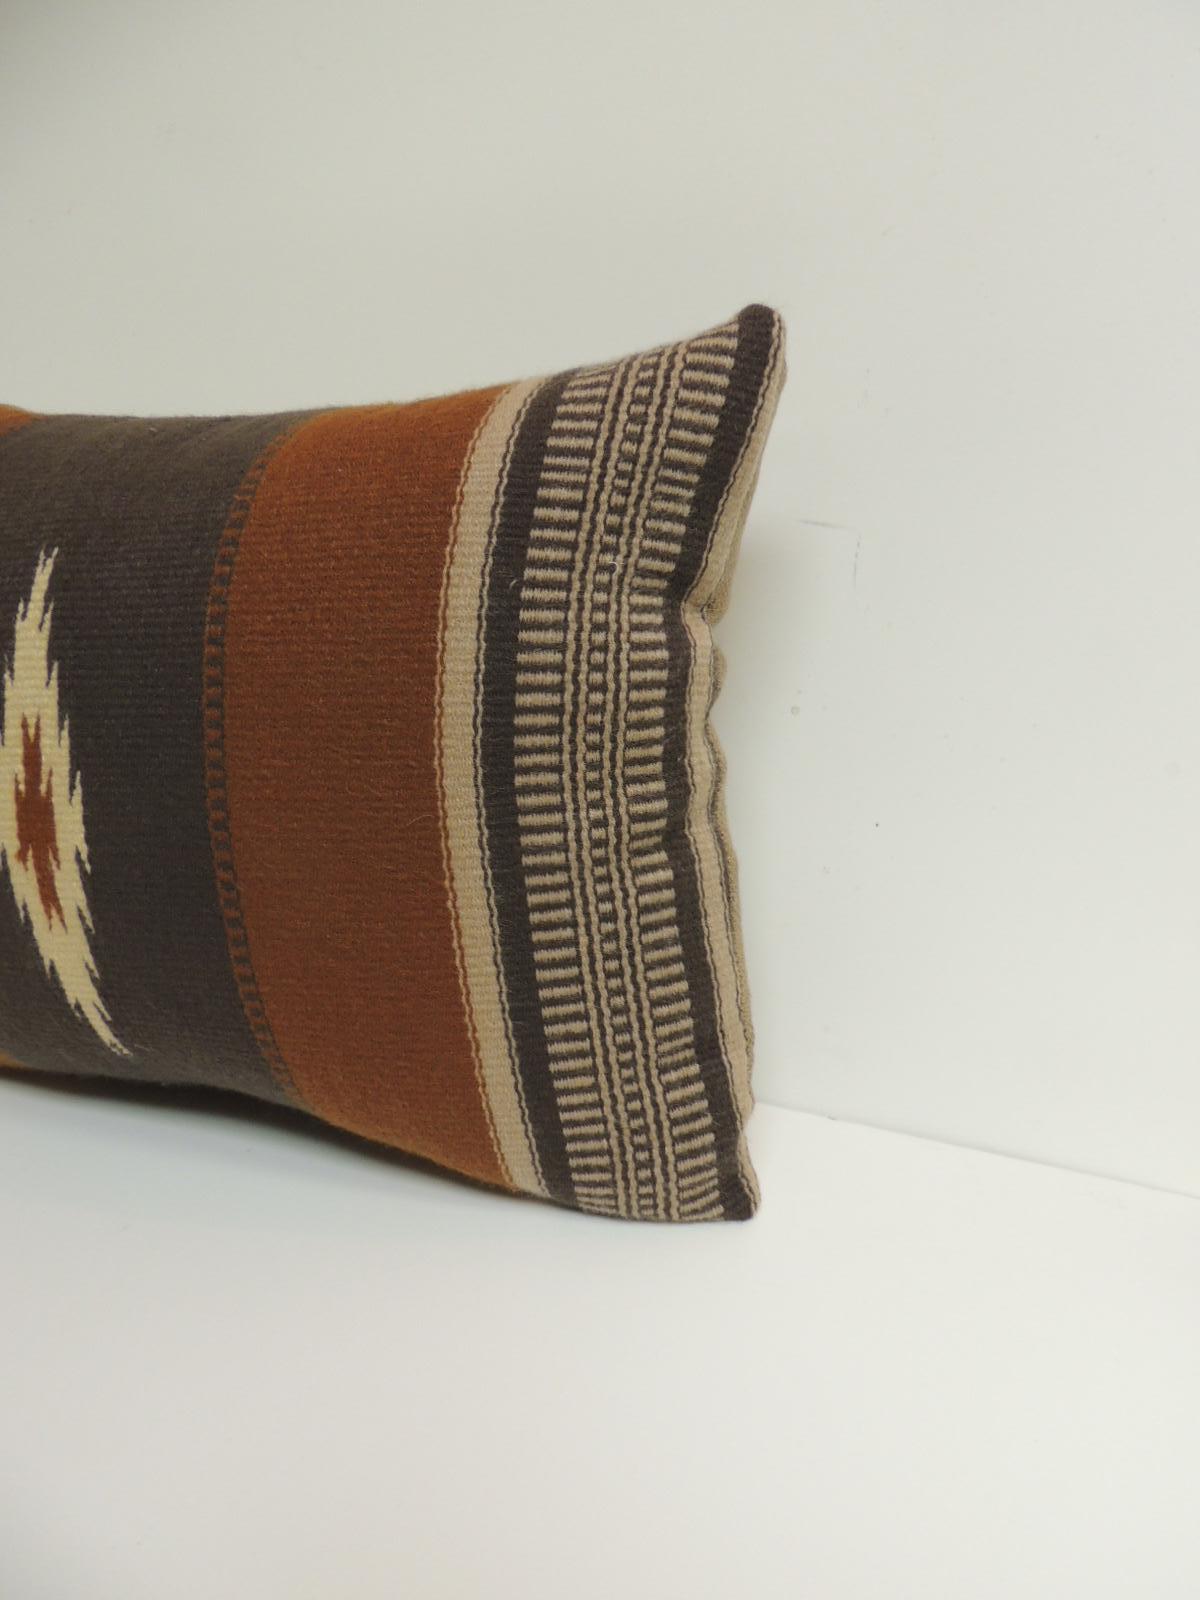 Vintage gray and brown southwestern style woven bolster pillow
Throw bolster vintage woven textile gray and brown in the southwestern style pillow.
Decorative bolster finished with basket weave textured brown wool backing. Throw pillow in shades